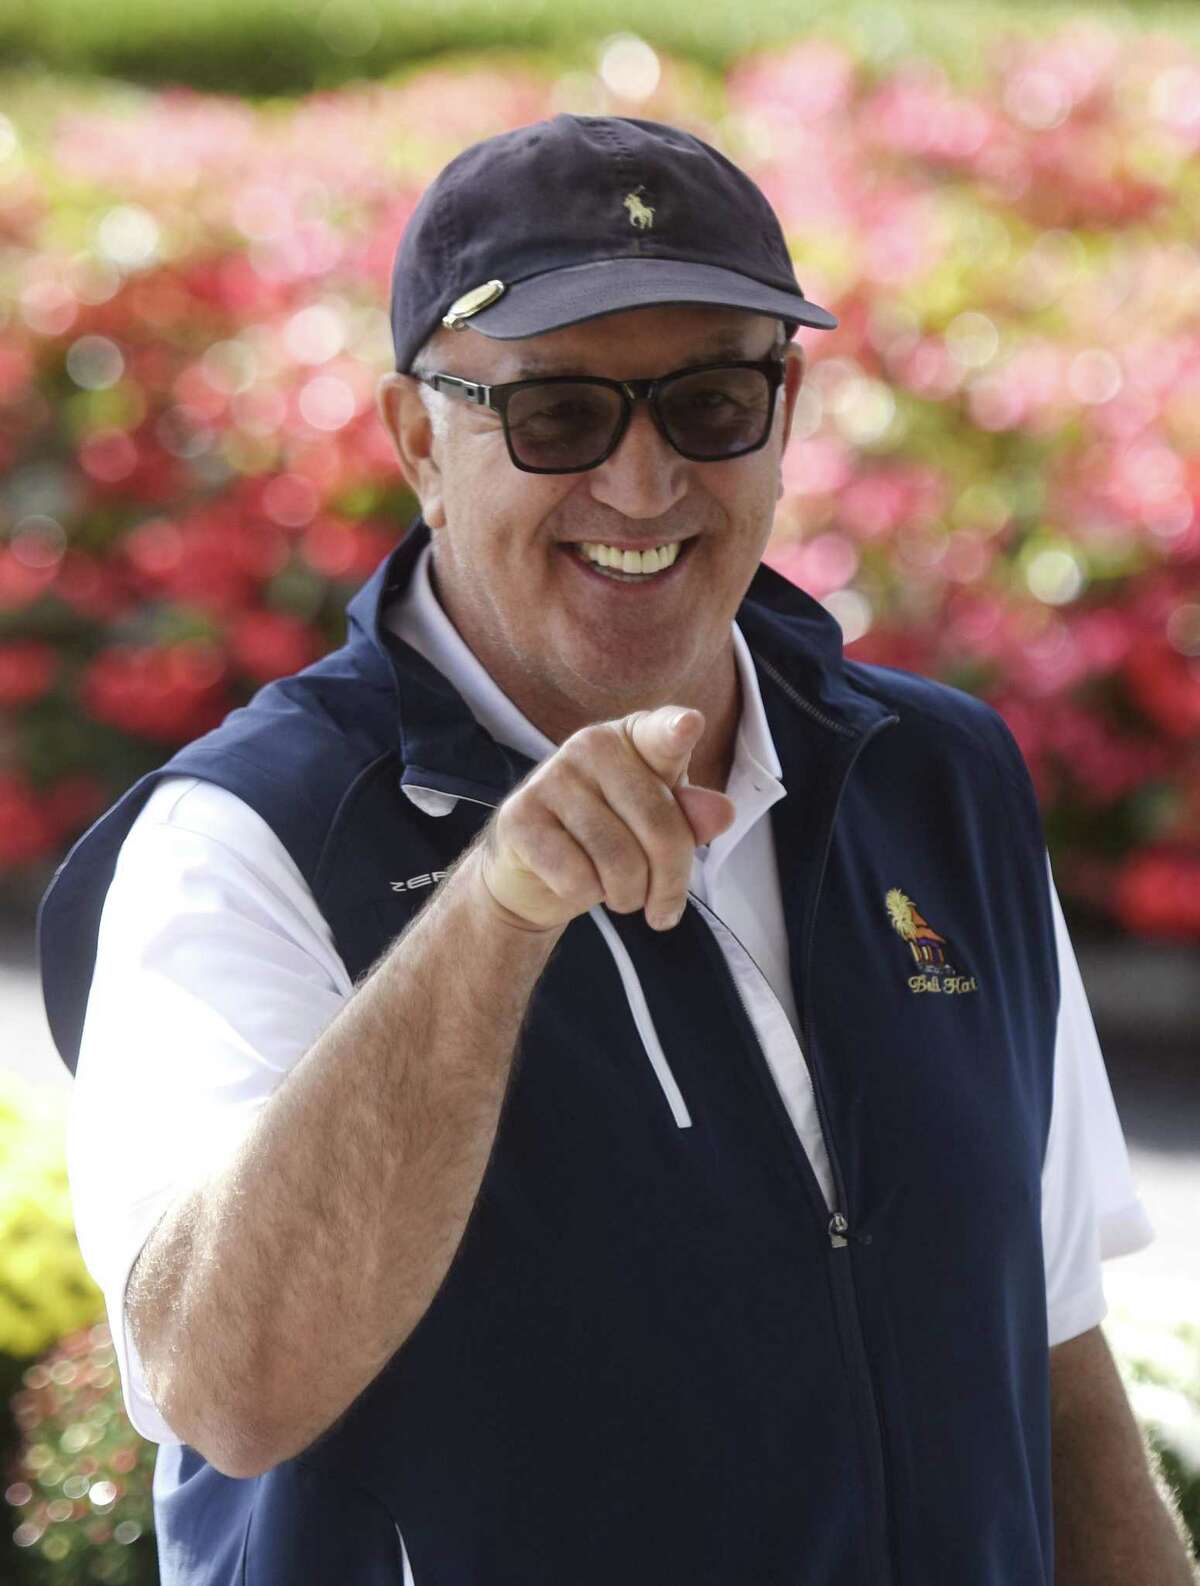 Former boxer Gerry Cooney is welcomed to the 27th annual Tim Teufel Celebrity Golf Tournament at Tamarack Country Club in Greenwich, Conn. Tuesday, Oct. 10, 2017. The golf outing, presented by Sweet'N Low, featured more than a dozen former and current sports celebrities competing on the course to raise money for the Fairfield County Sports Commission.